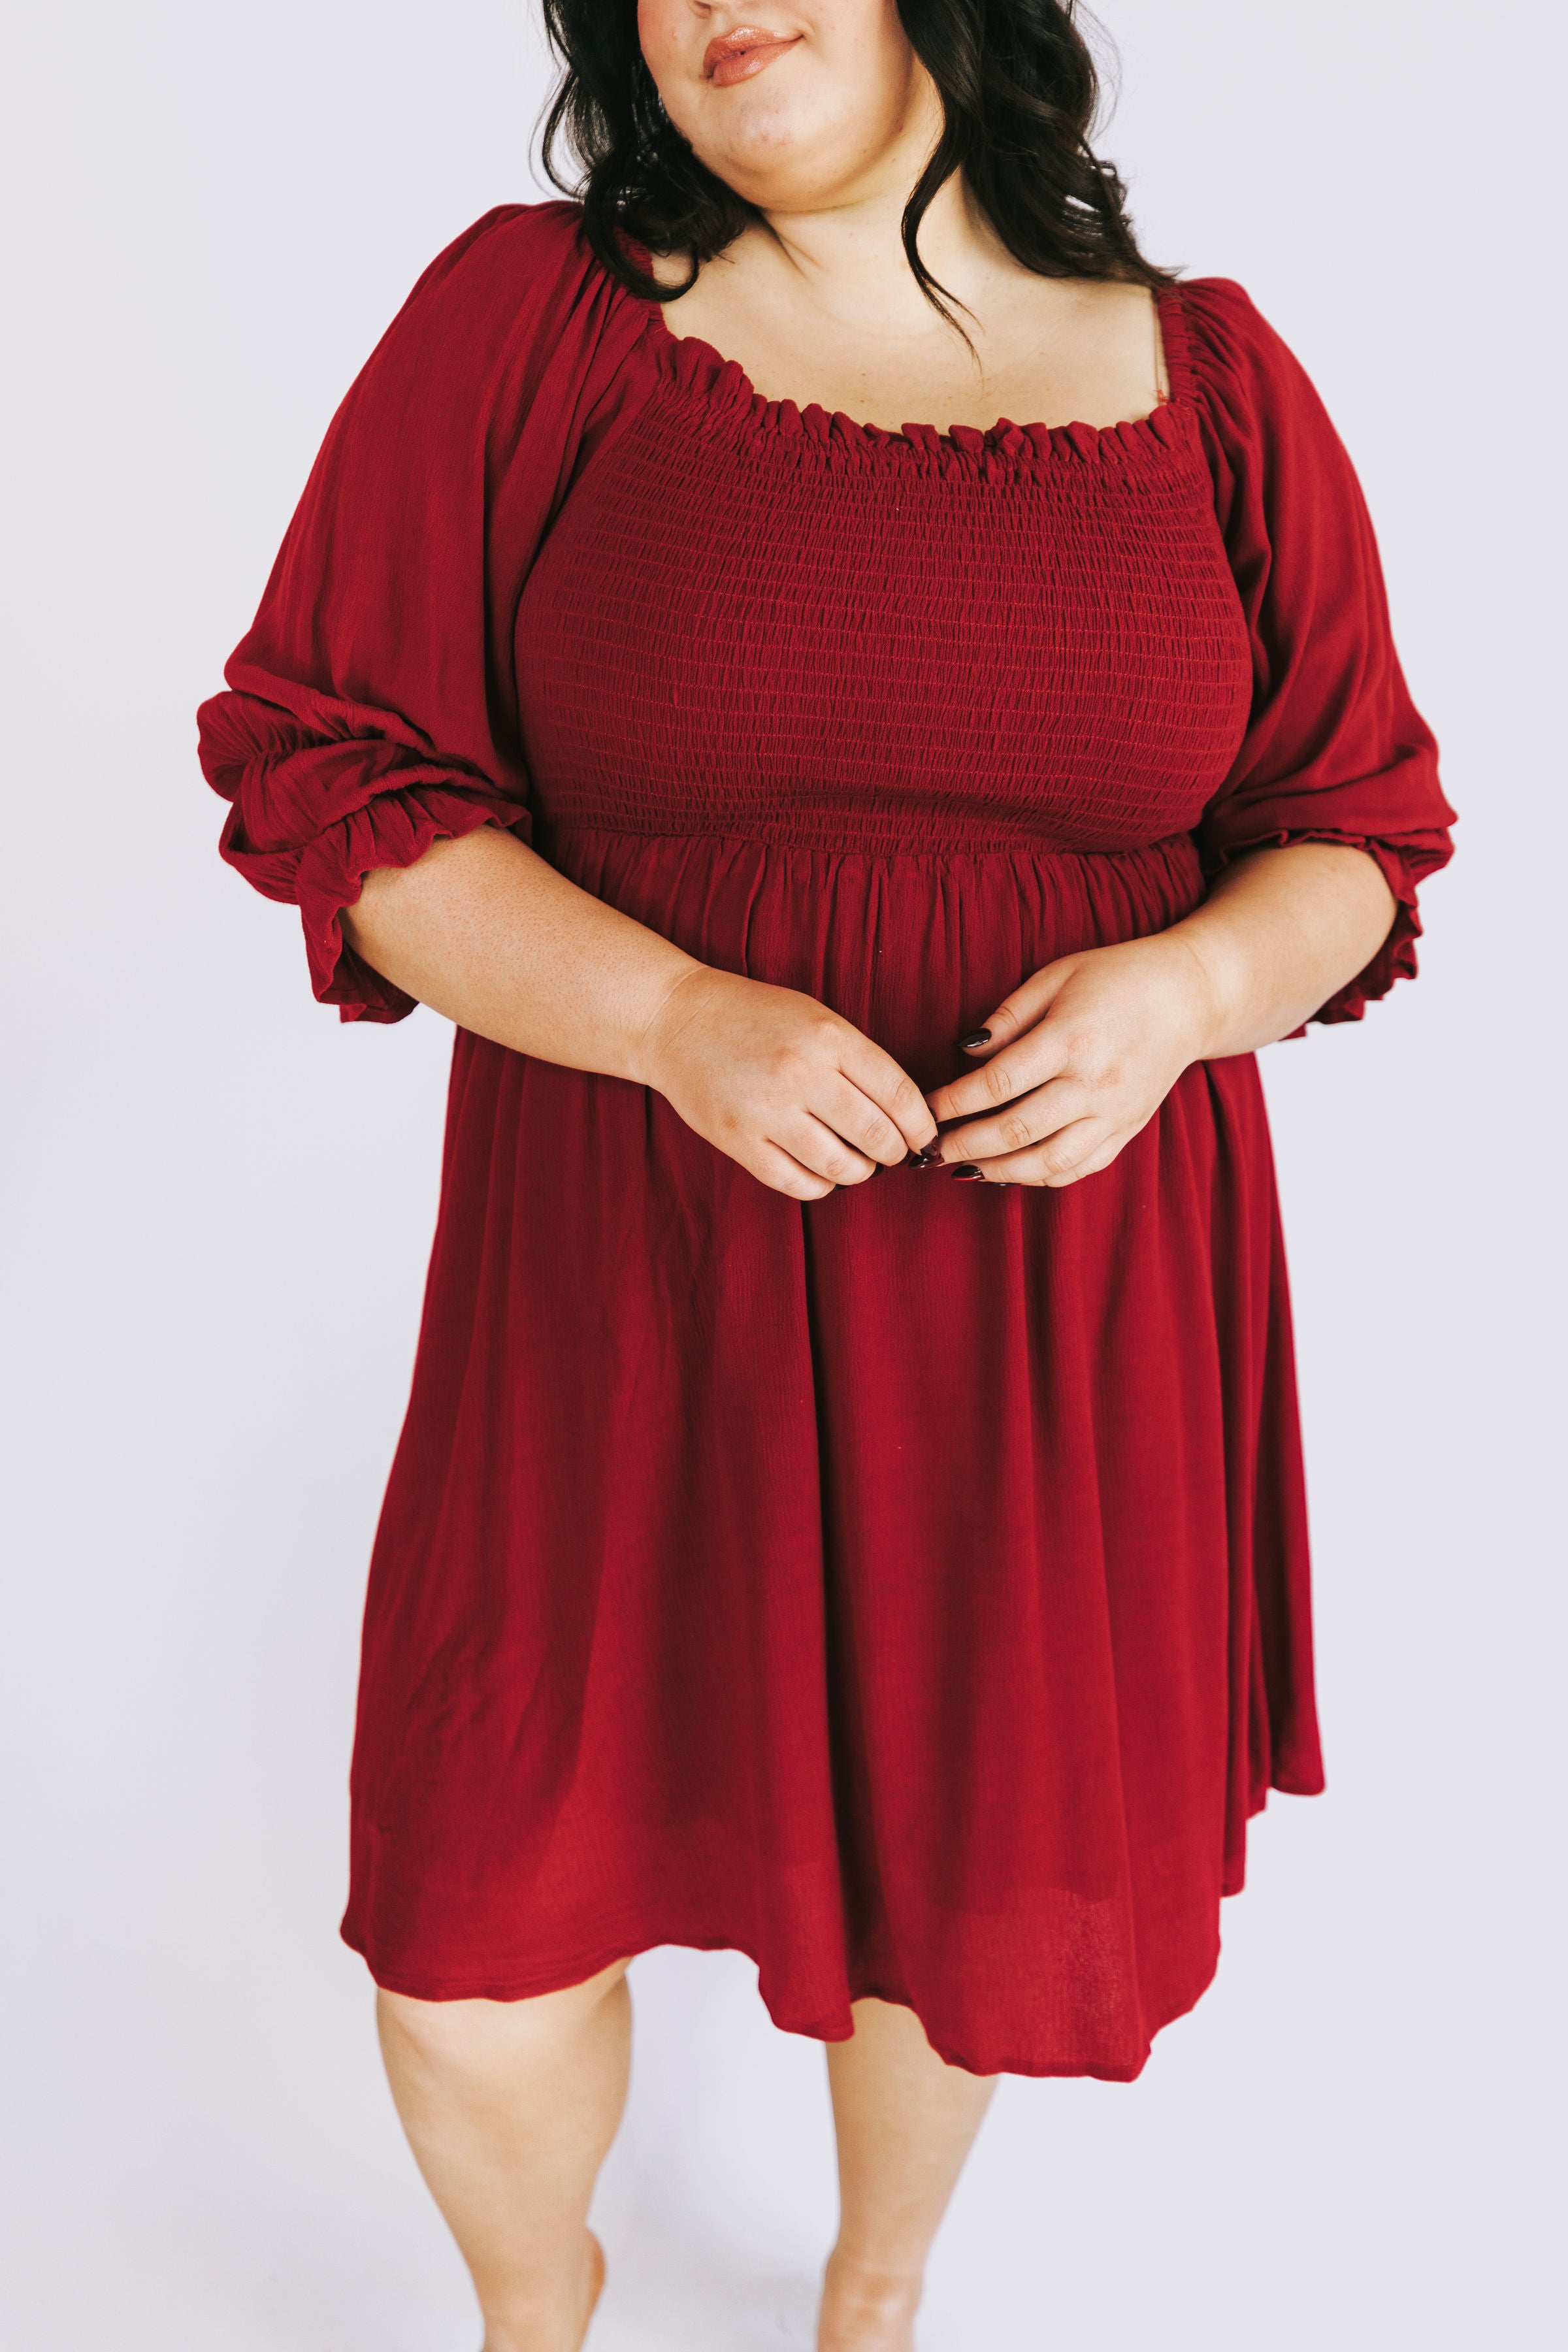 PLUS SIZE - Get To Know You Dress